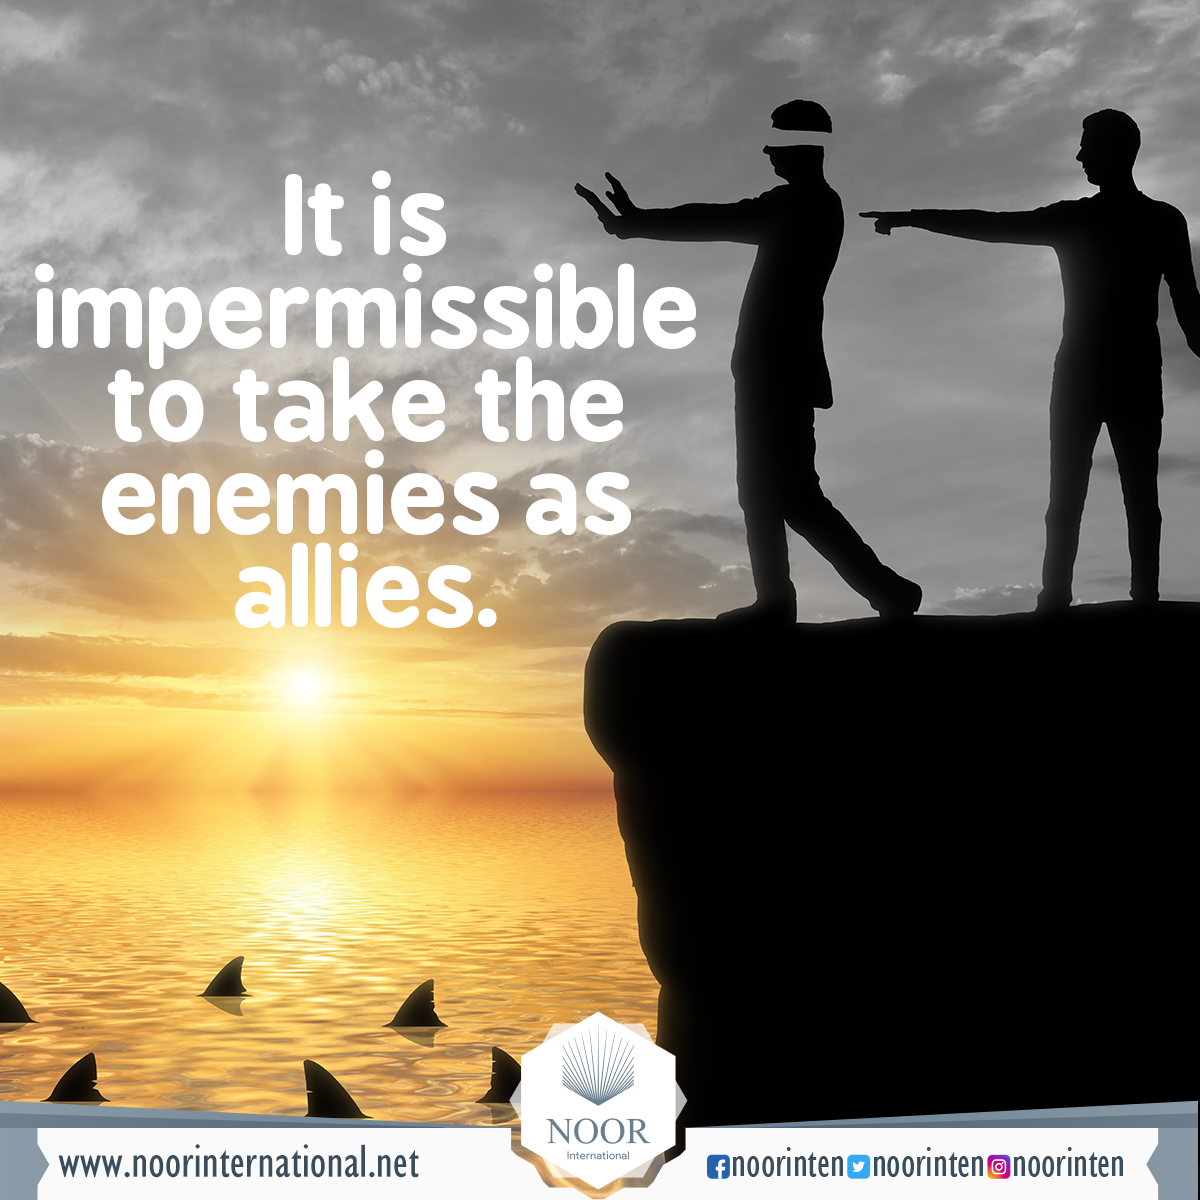 It is impermissible to take the enemies as allies.